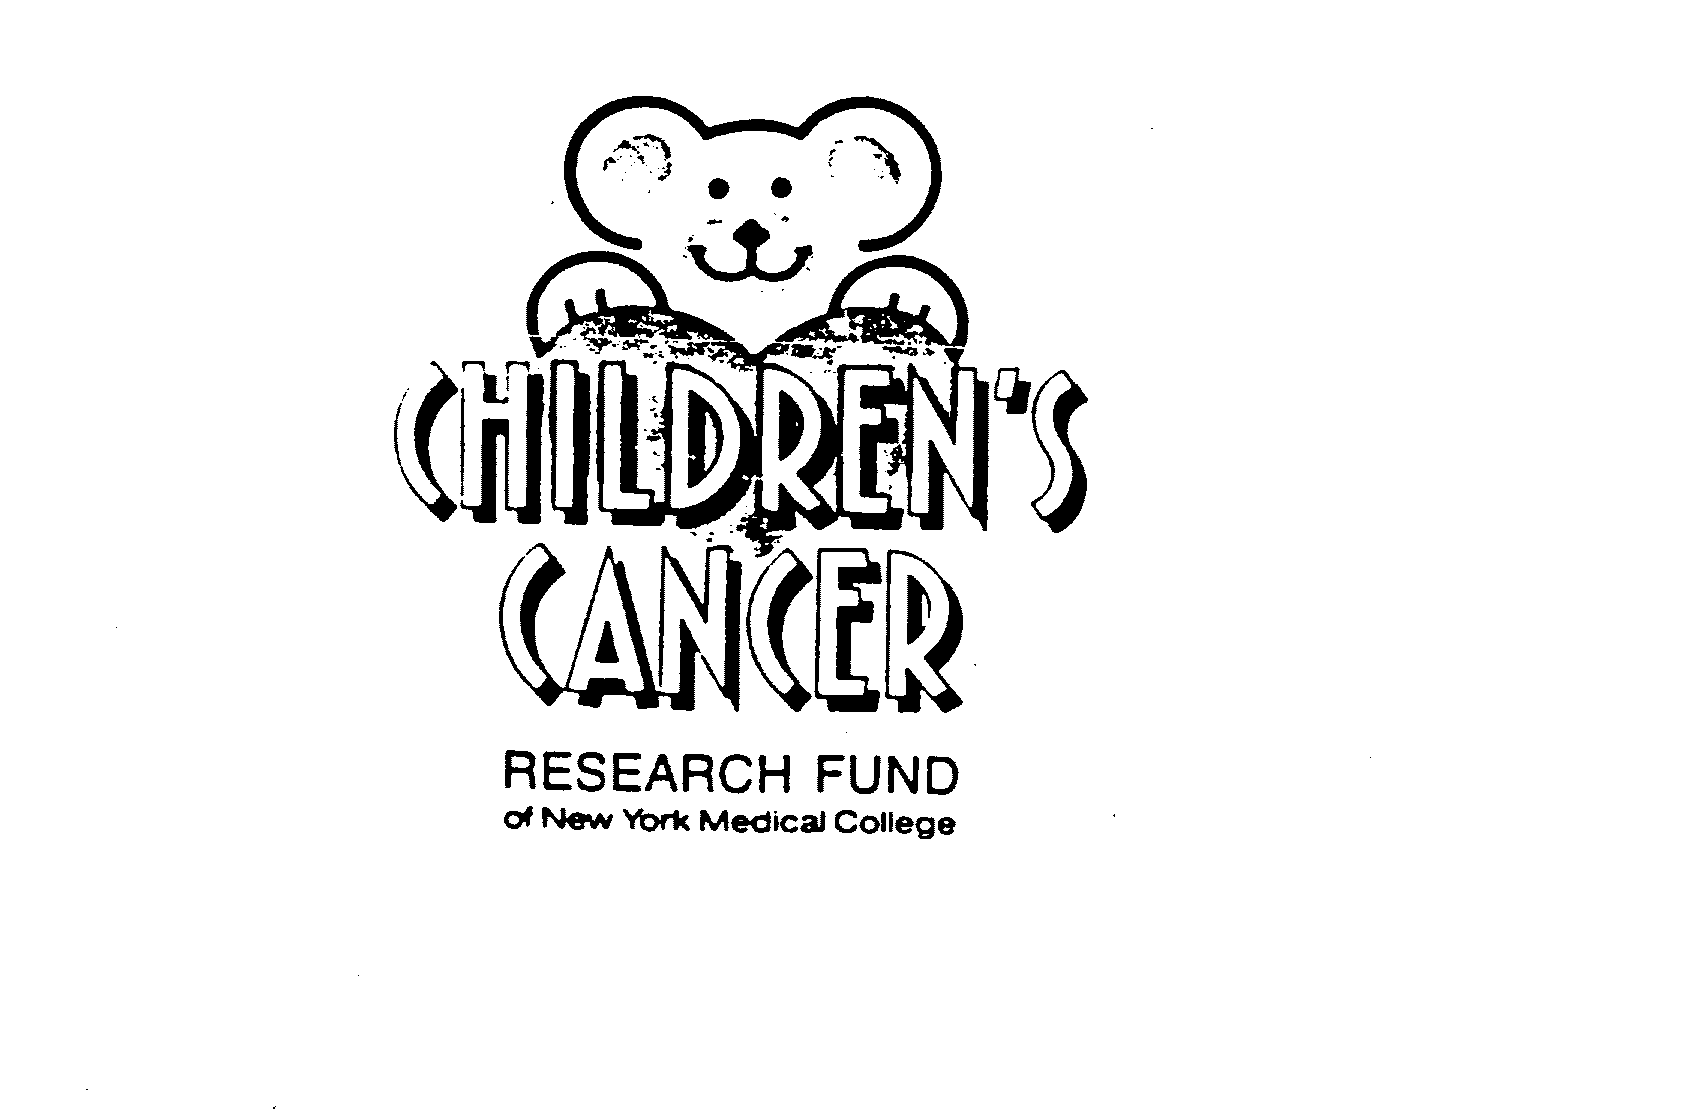  CHILDREN'S CANCER RESEARCH FUND OF NEW YORK MEDICAL COLLEGE